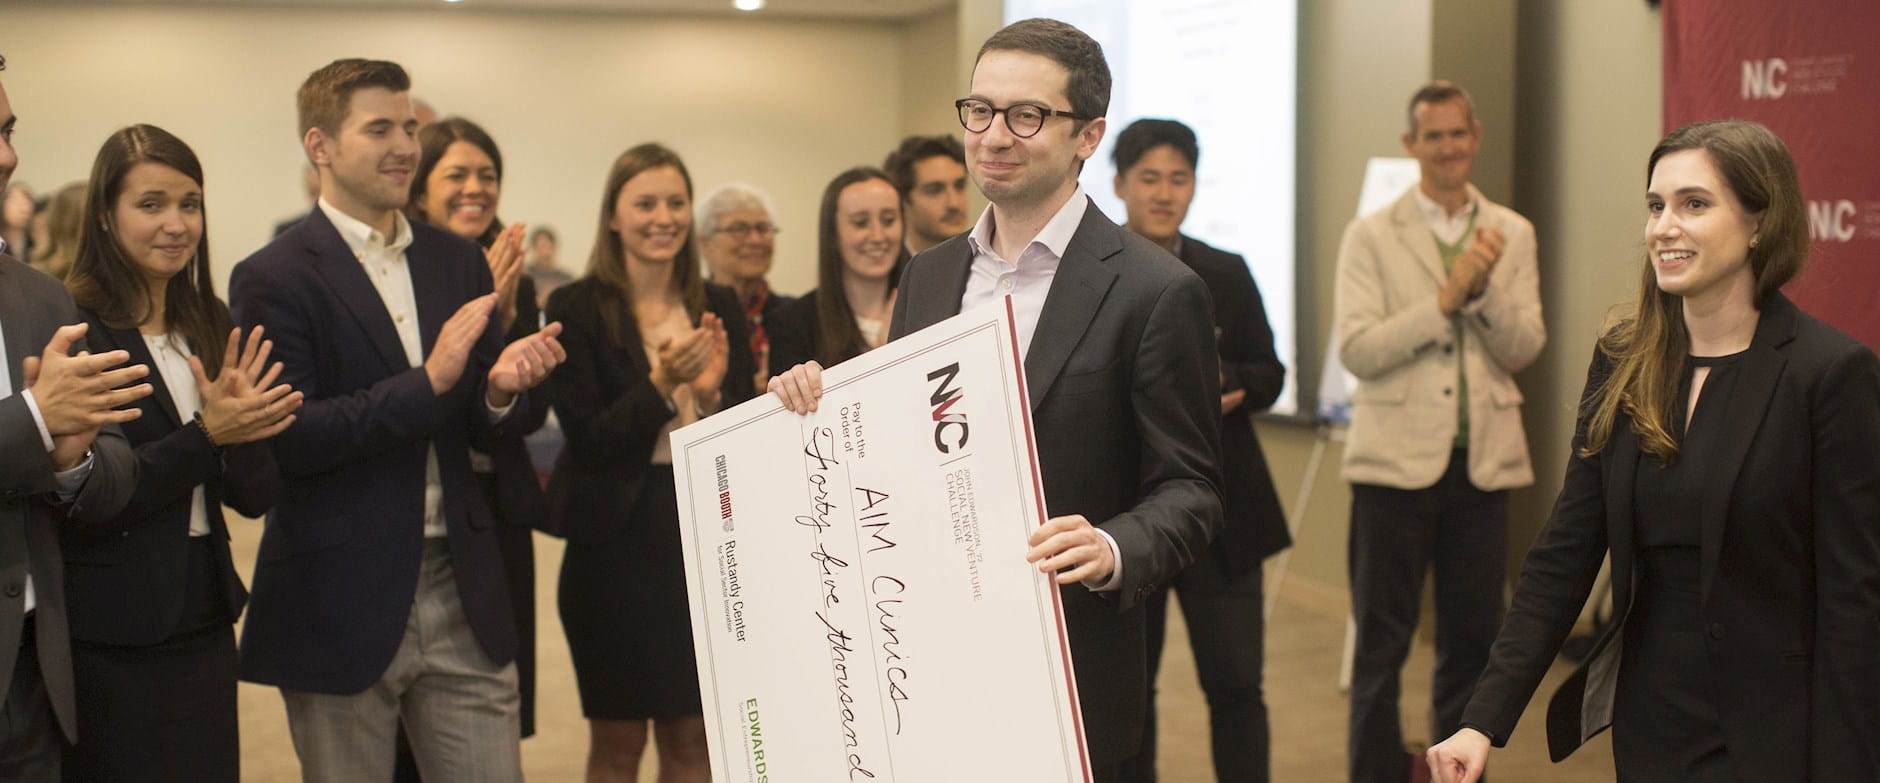 AIM cofounder George Boghos holds a giant check after winning SNVC 2018